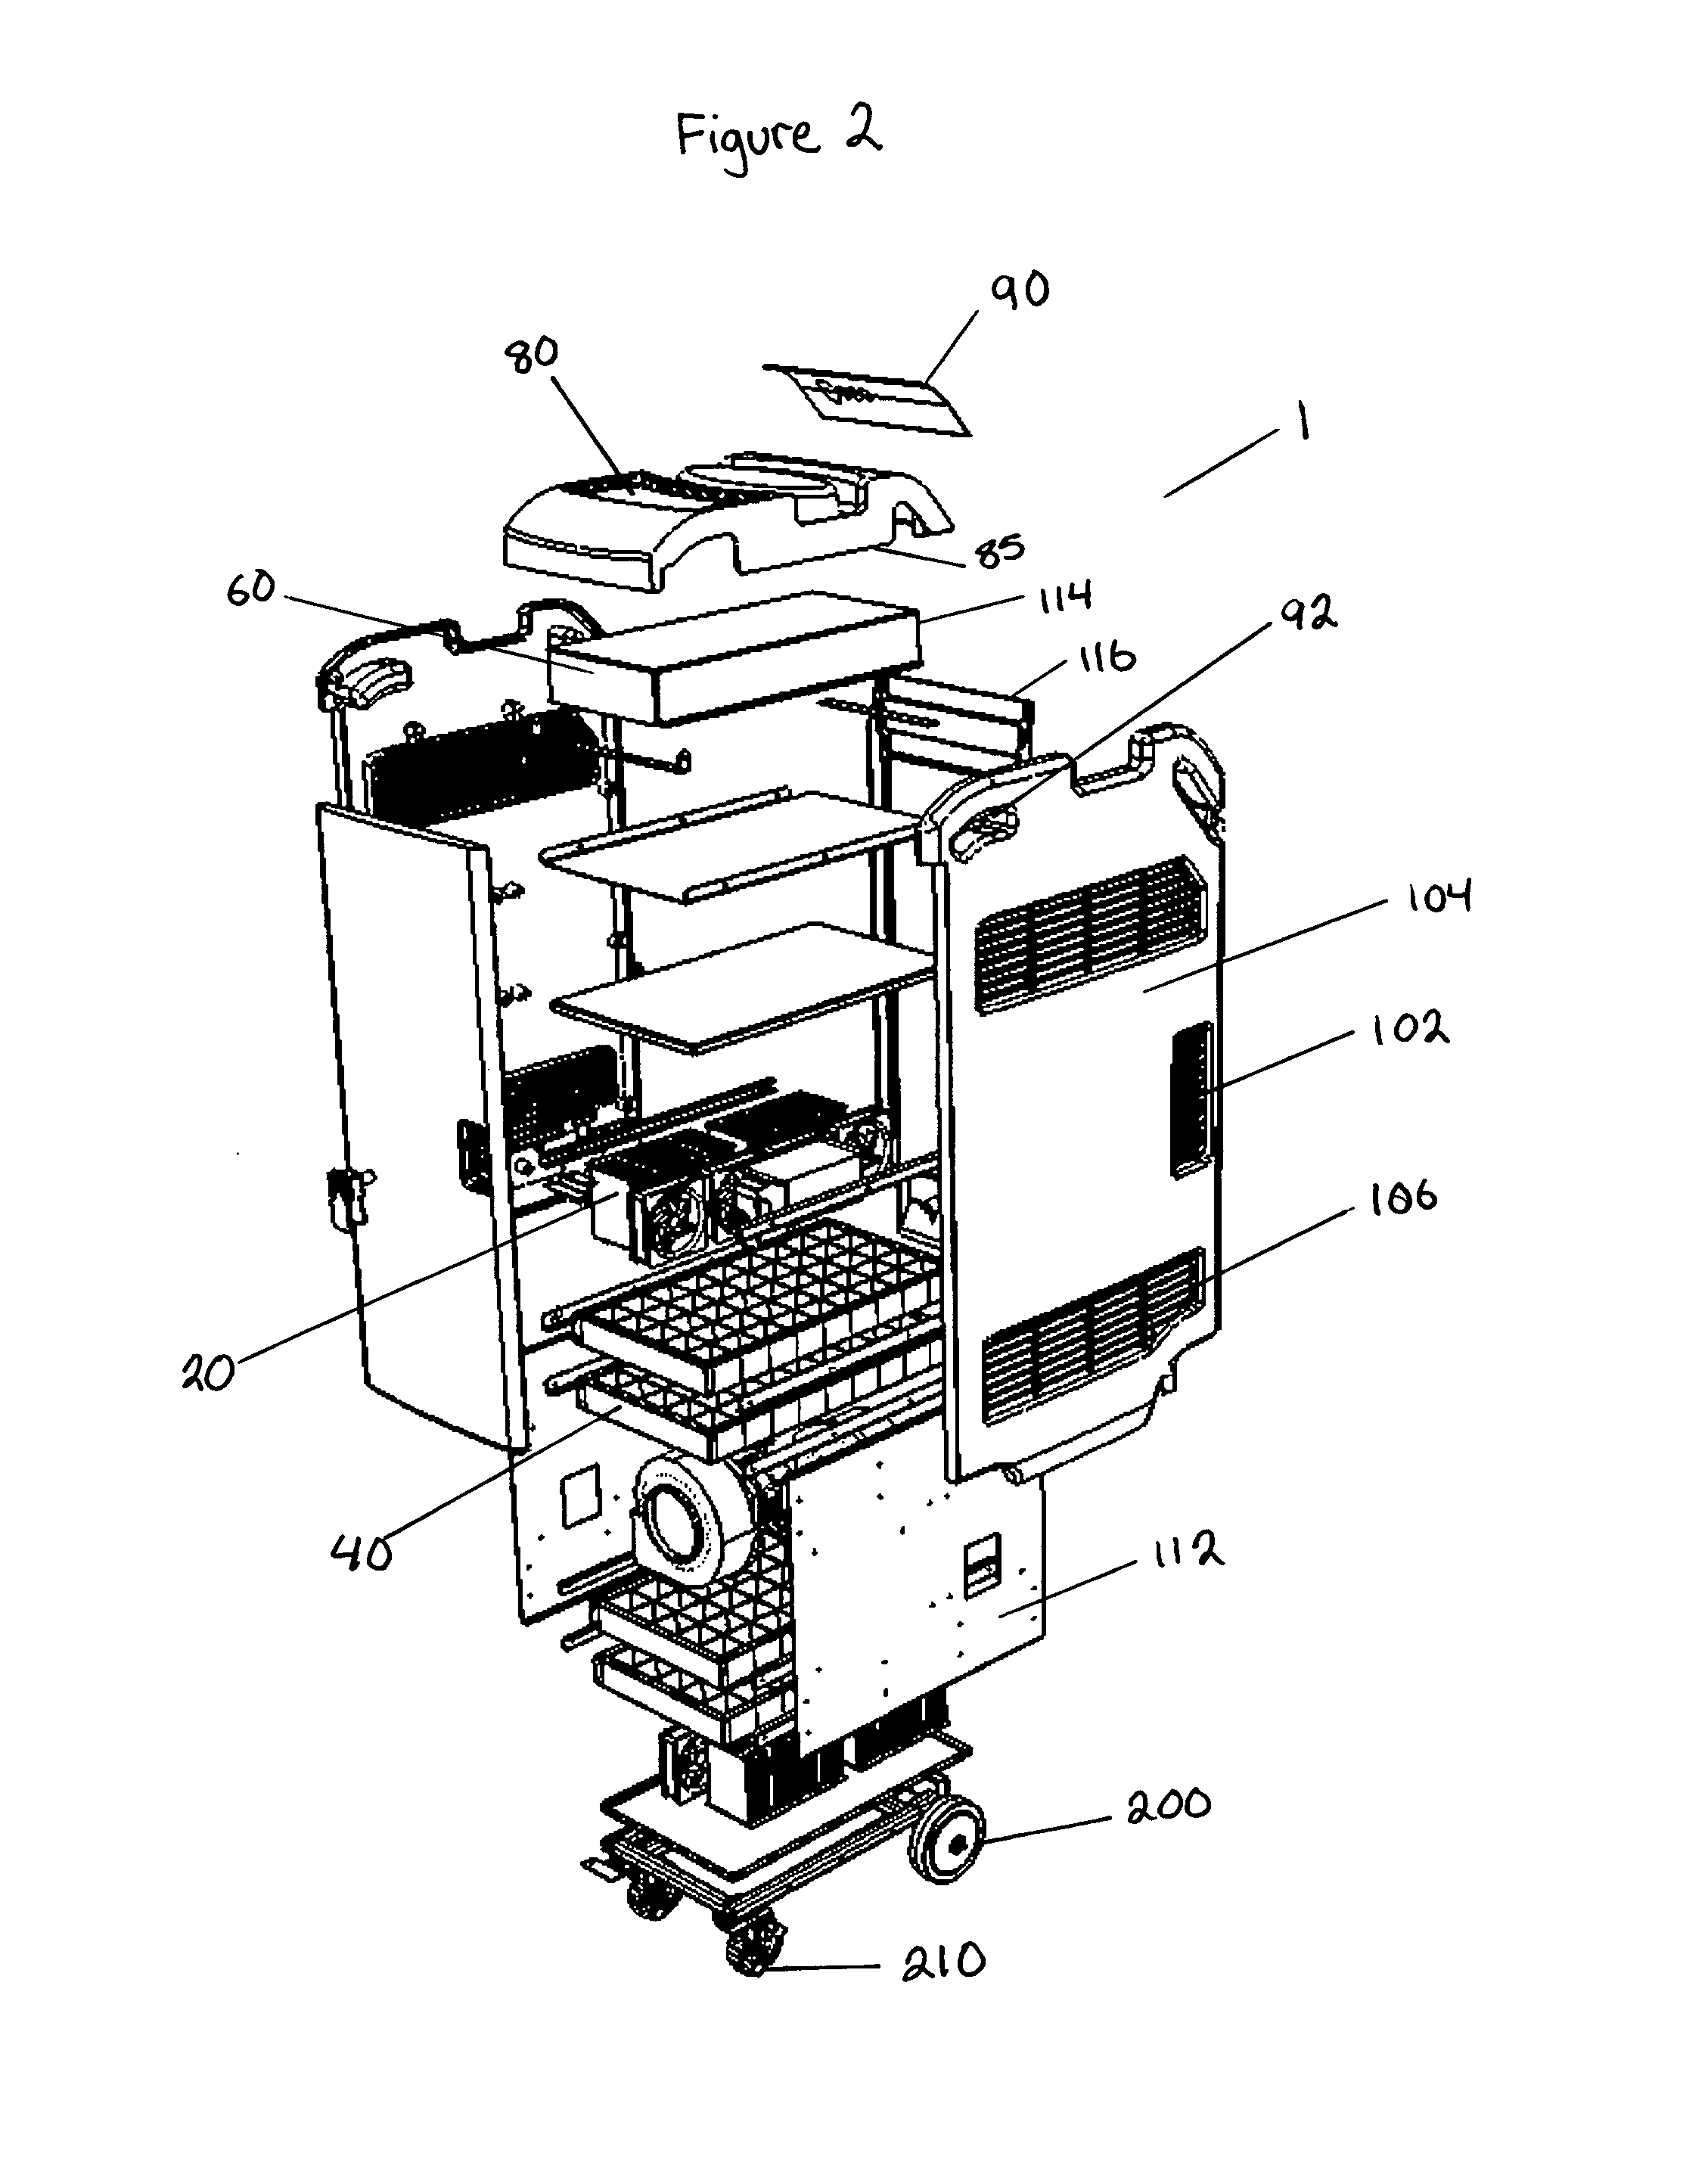 Apparatus and method for using ozone as a disinfectant